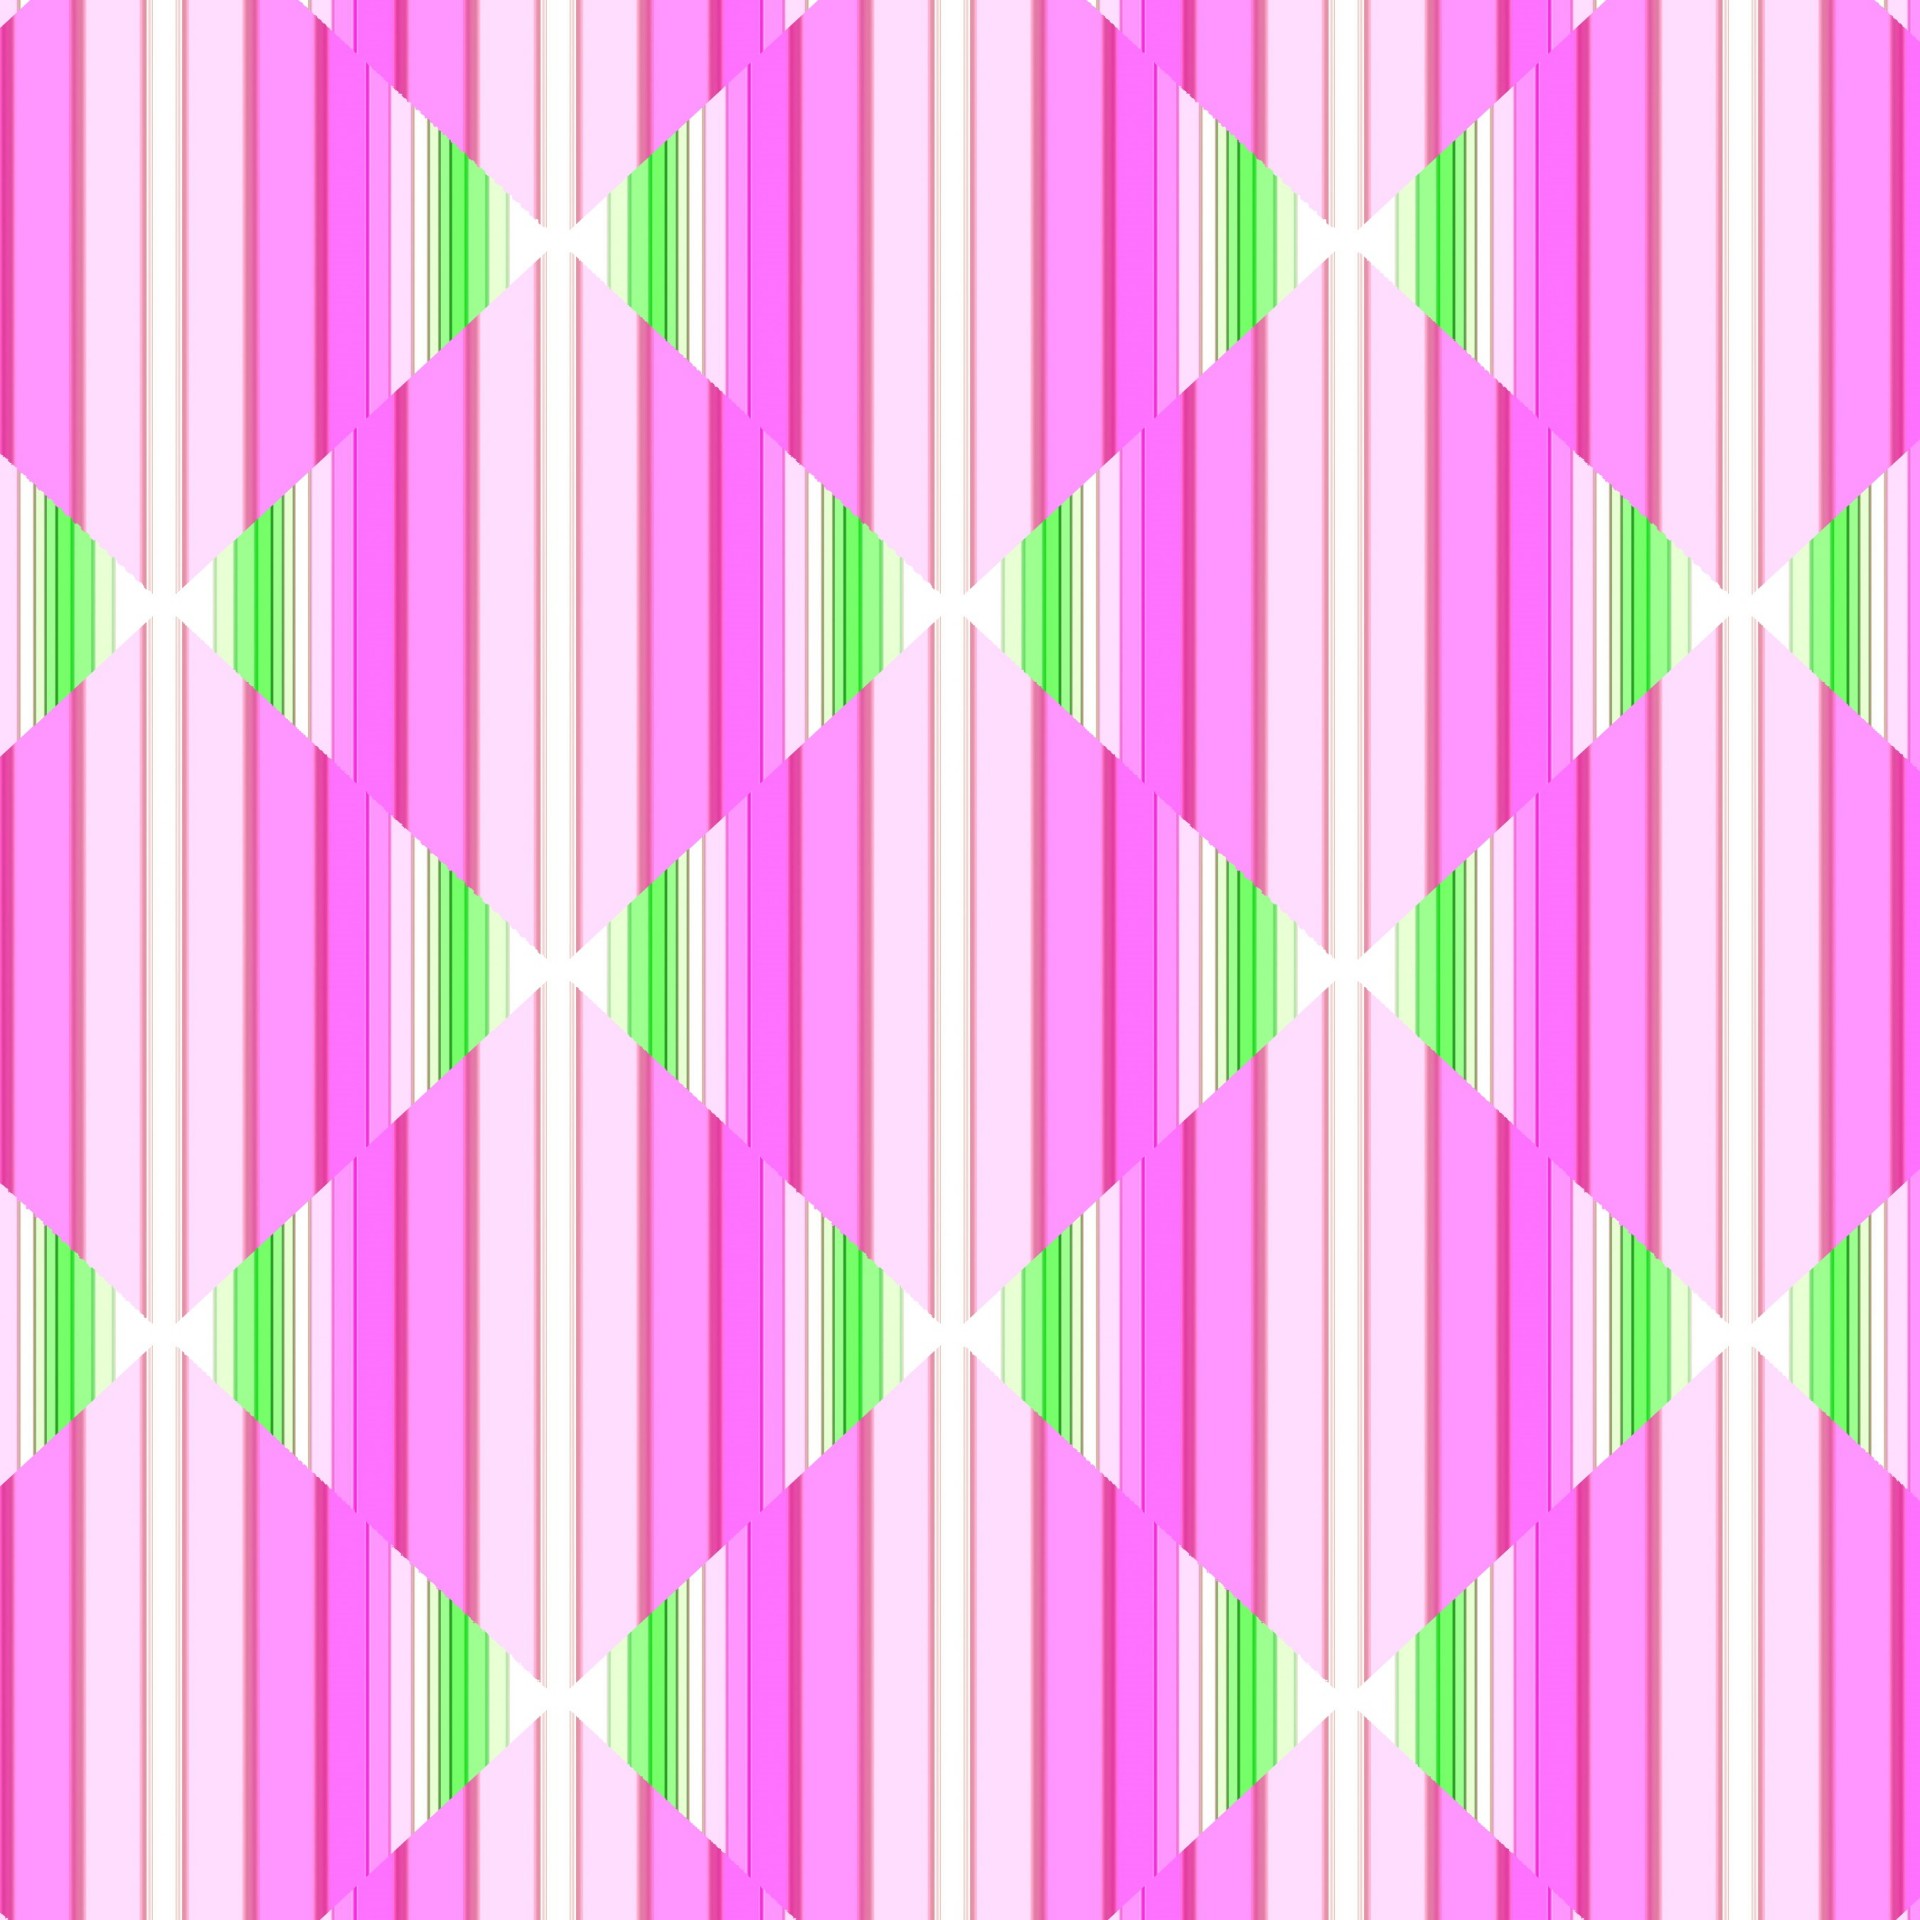 scrapbooking background paper stripes free photo